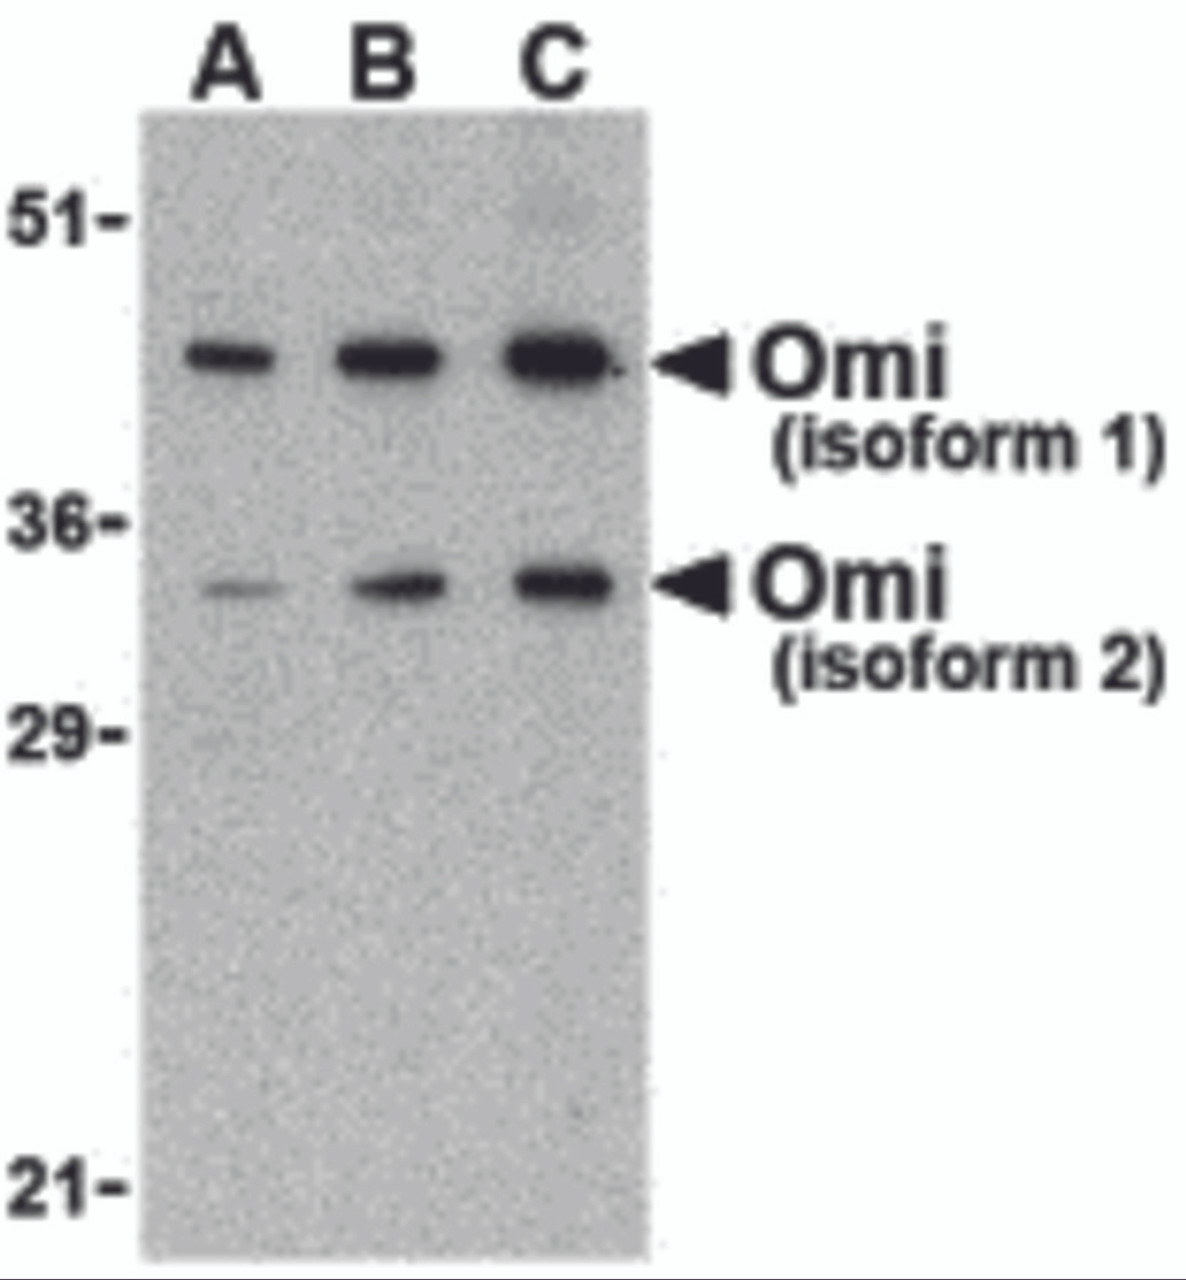 Western blot analysis of OMI in U937 lysate with Omi antibody at (A) 0.5, (B) 1, and (C) 2 &#956;g/mL.